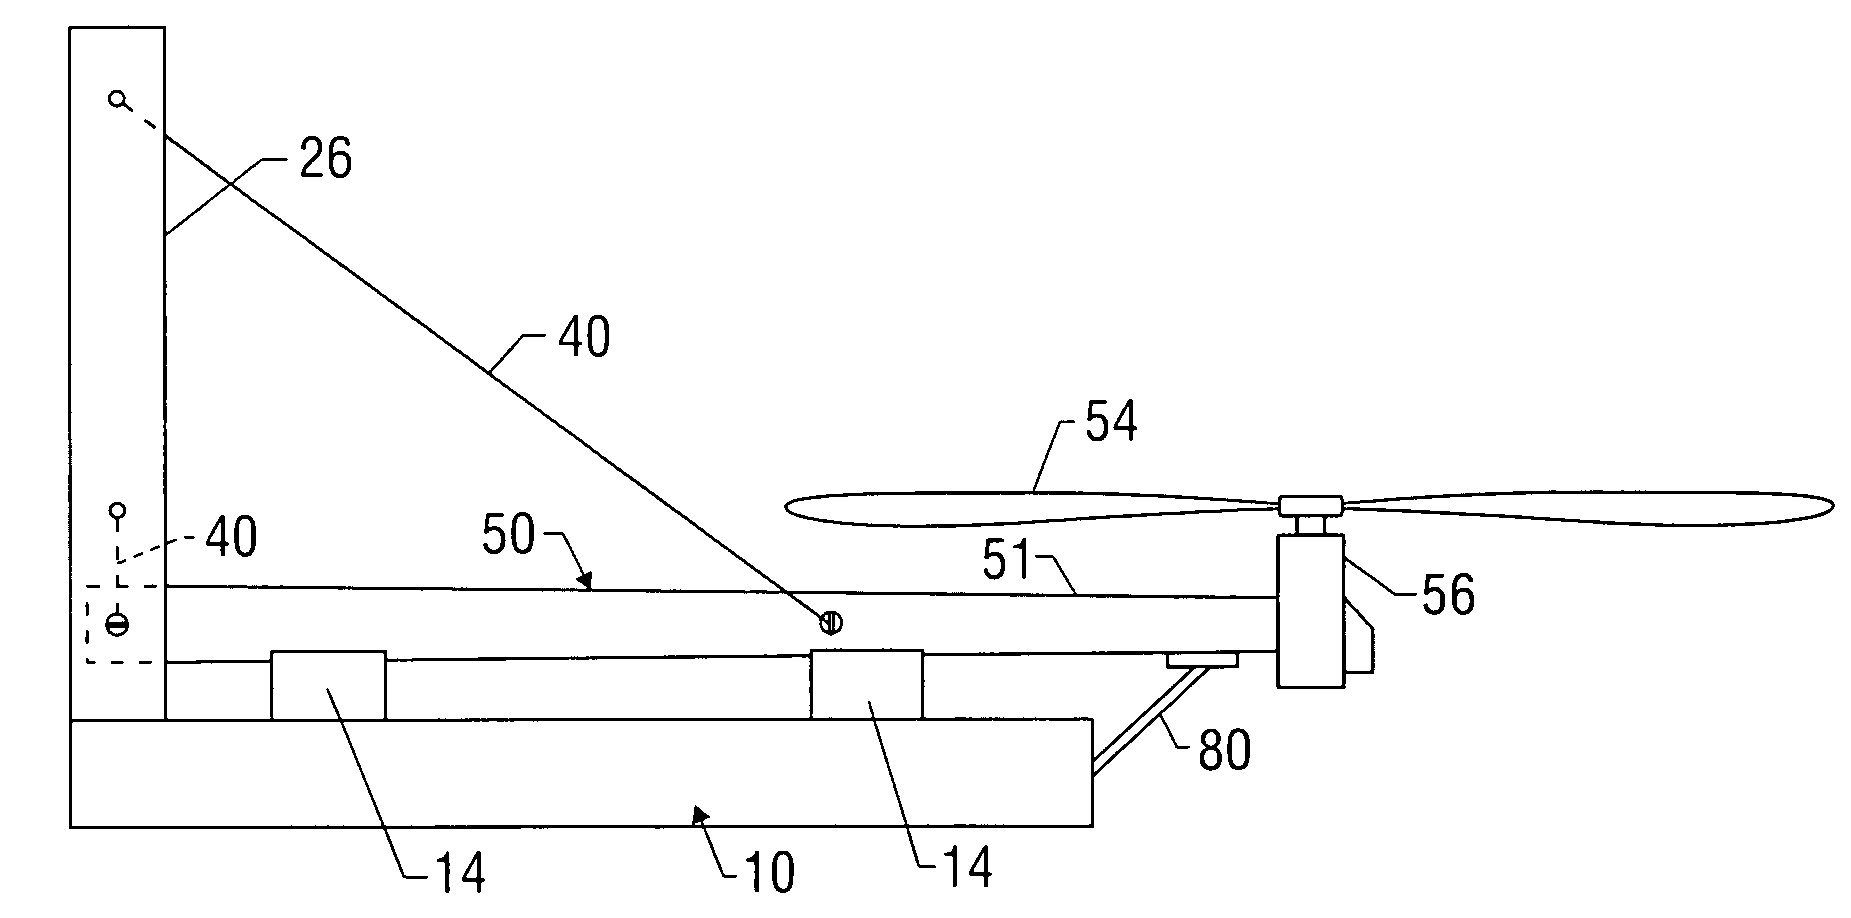 Apparatus, systems and methods for erecting an offshore wind turbine assembly